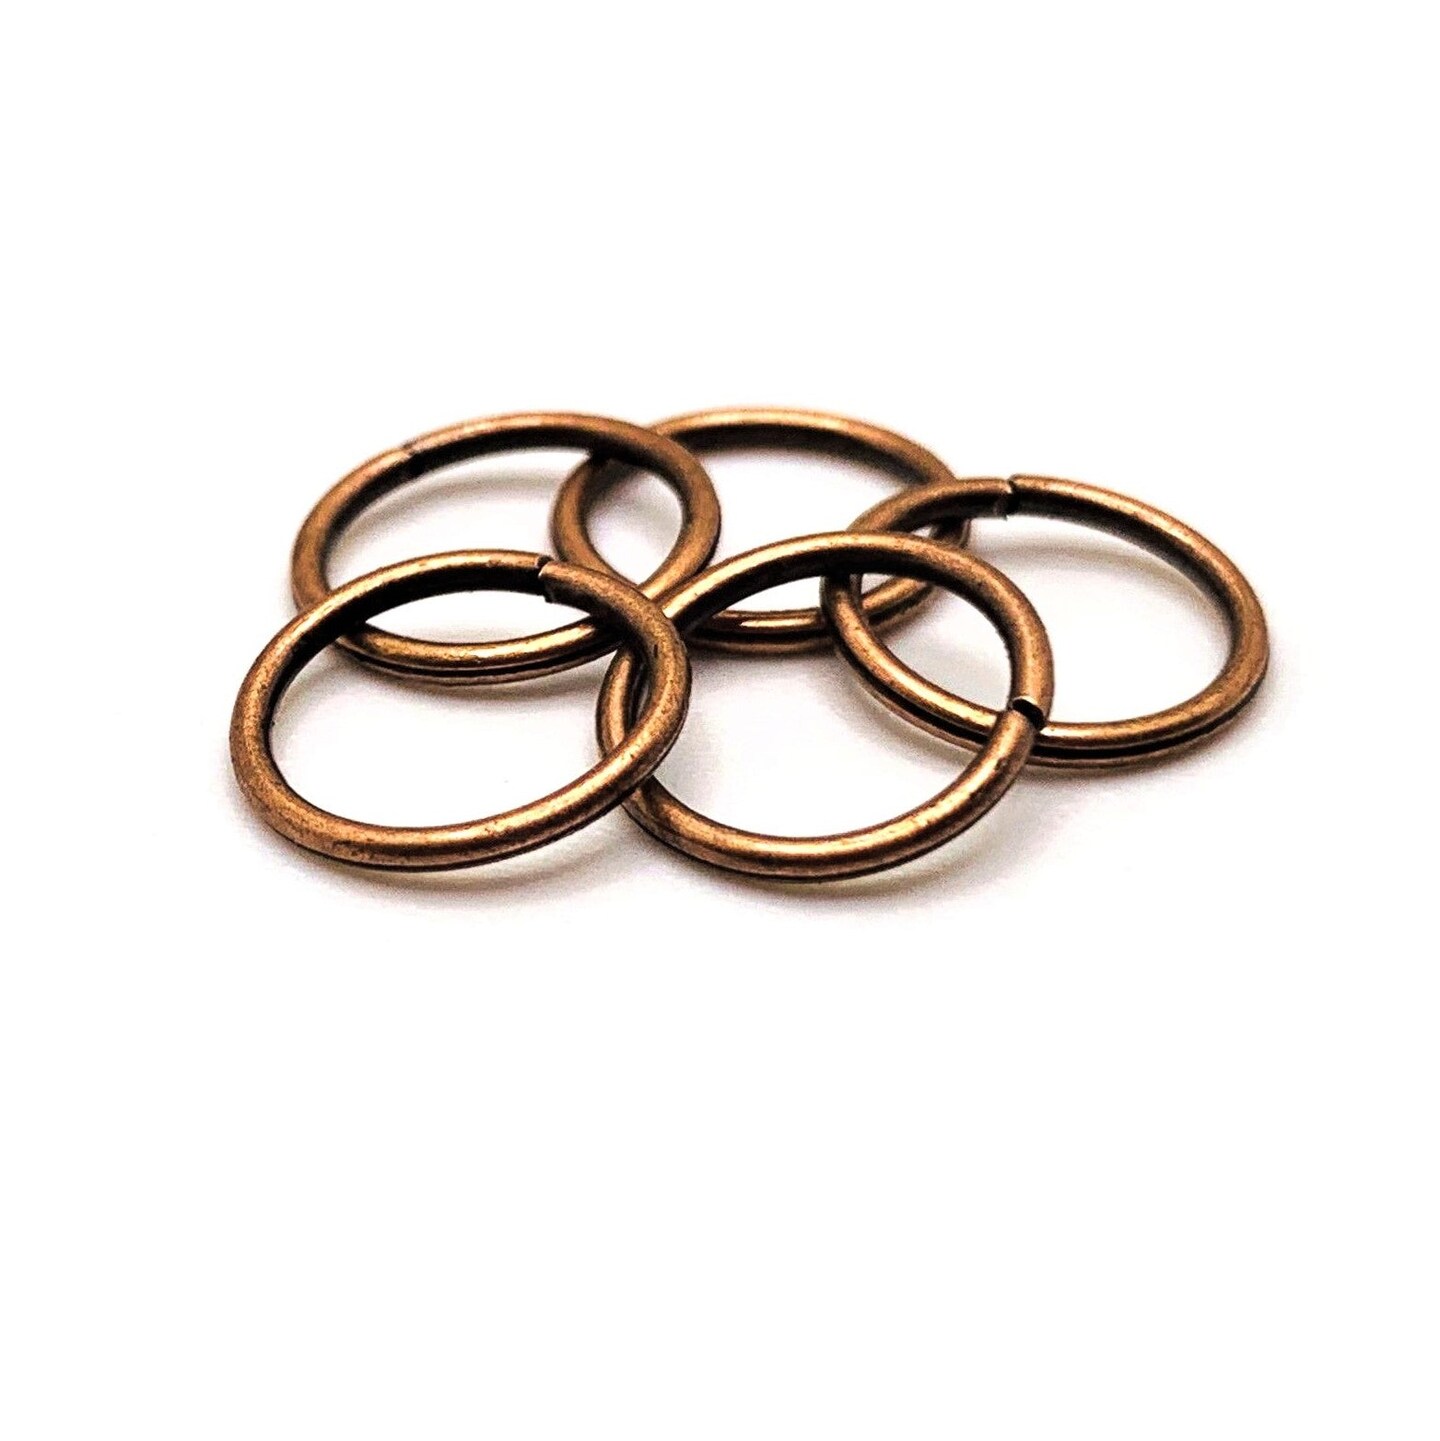 100, 500 or 1,000 Pieces: 10 mm Antique Copper Open Jump Rings, 18g